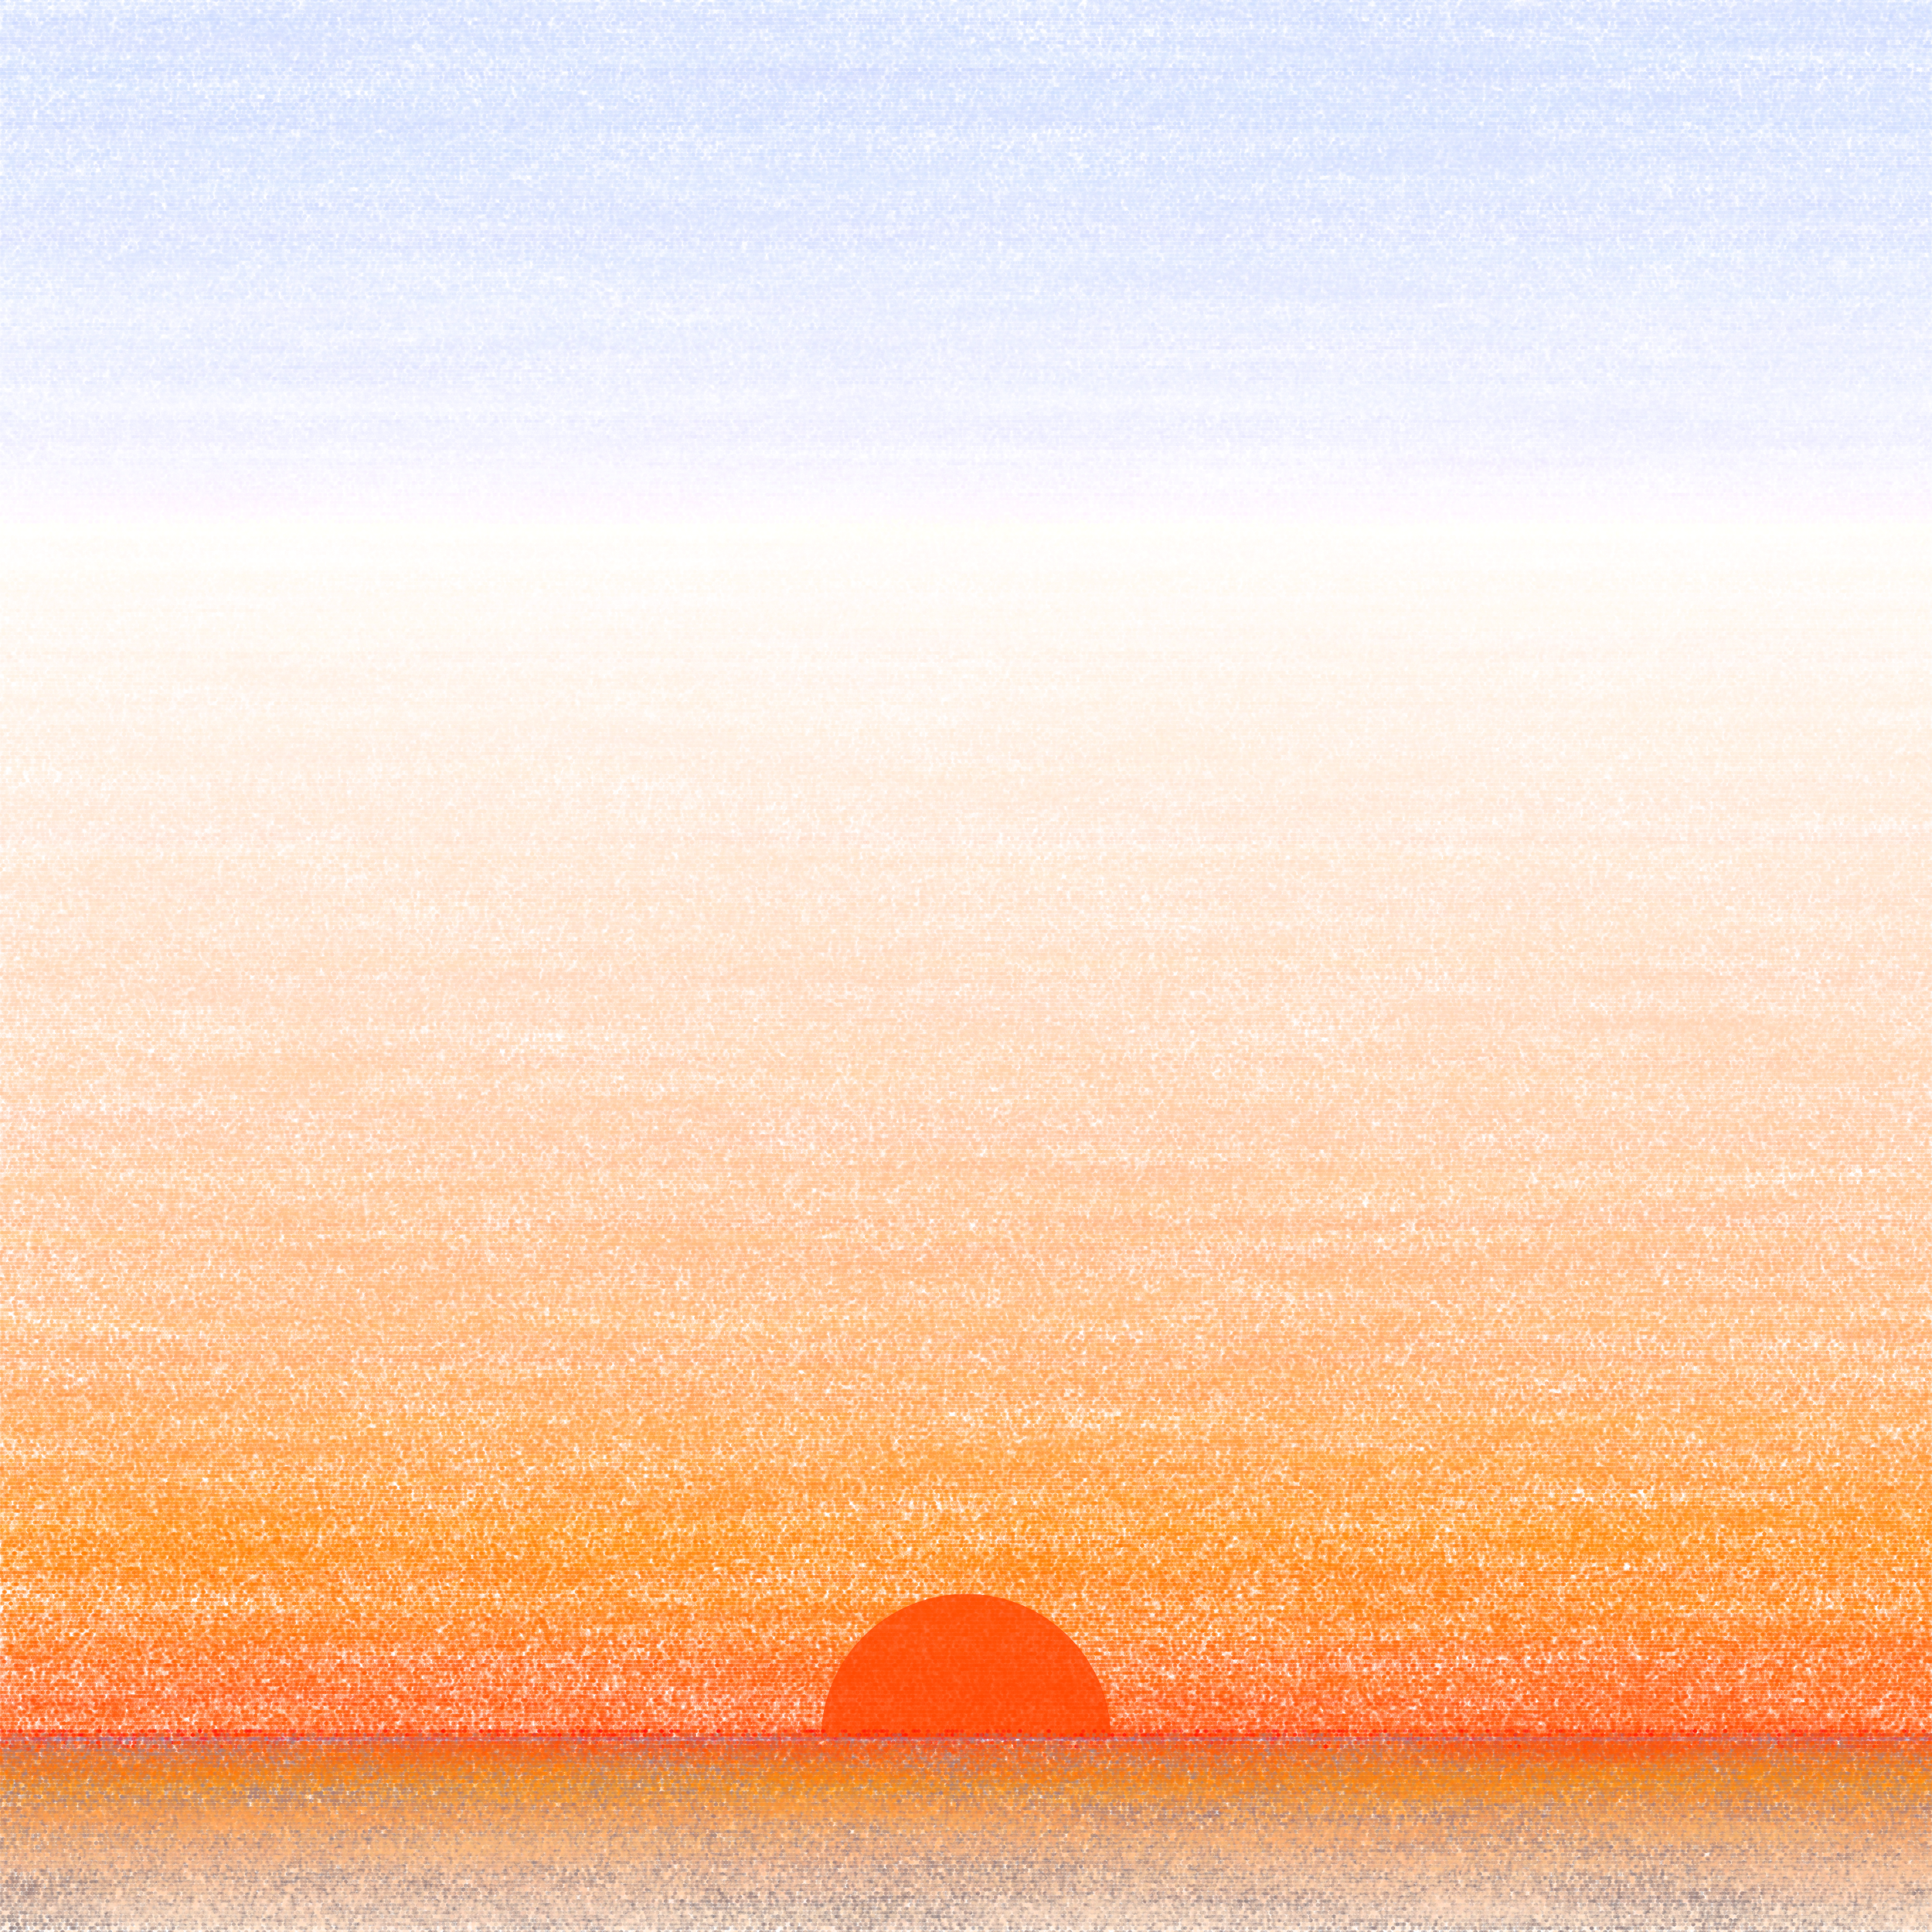 sunrise...or is it sunset? » drawings » SketchPort